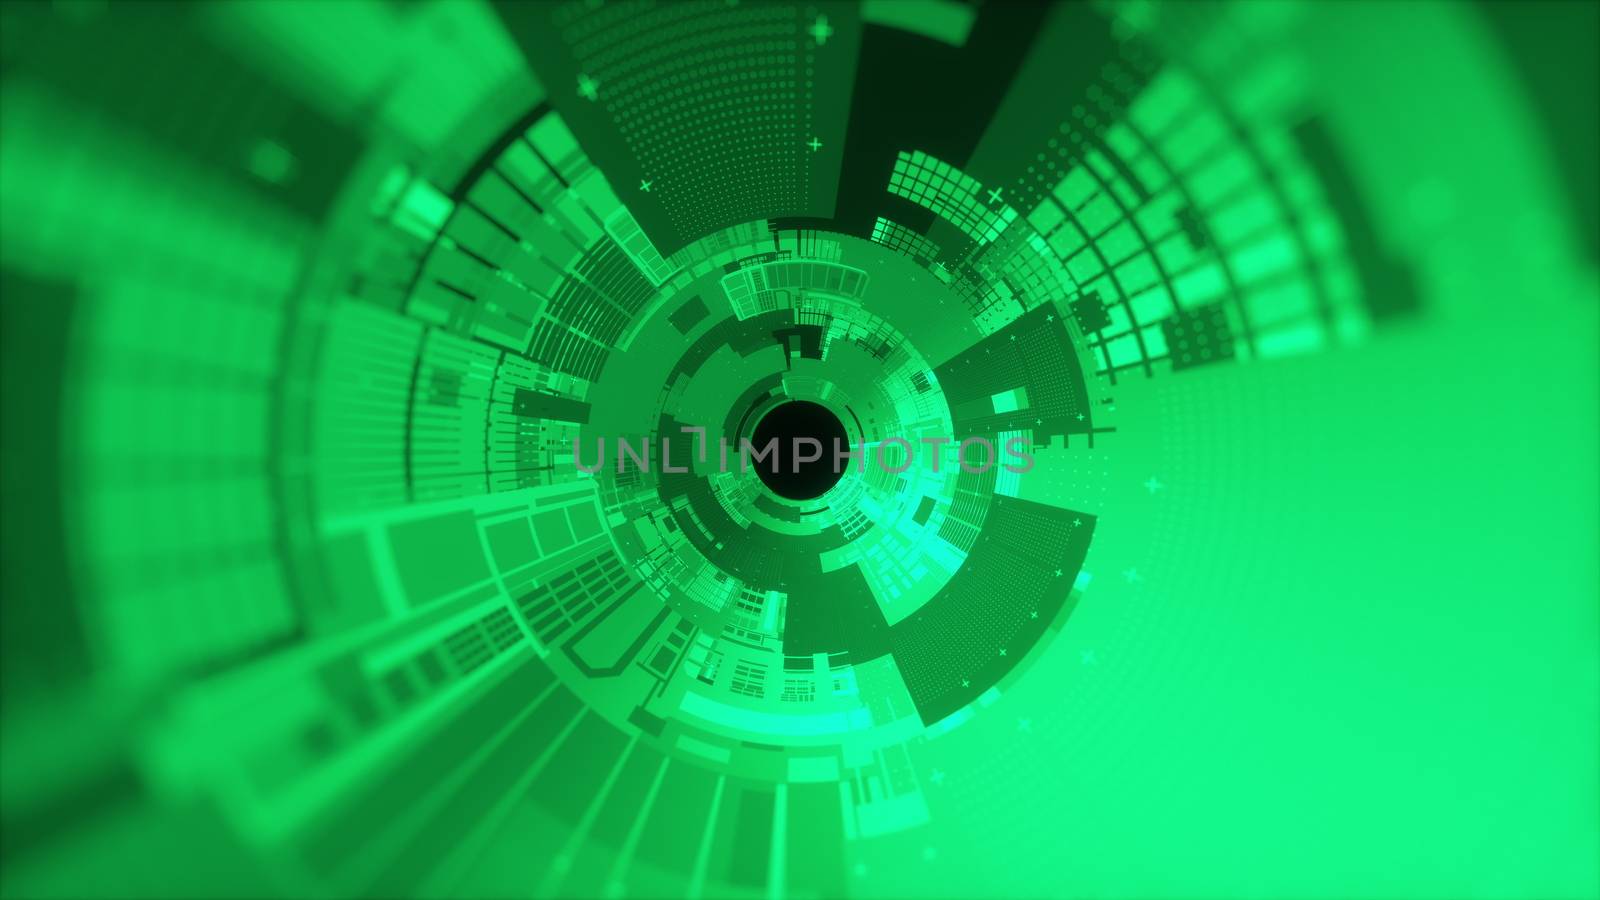 Abstract background of a cylindrical tunnel made of microchips. Computer generated 3d rendering by nolimit046